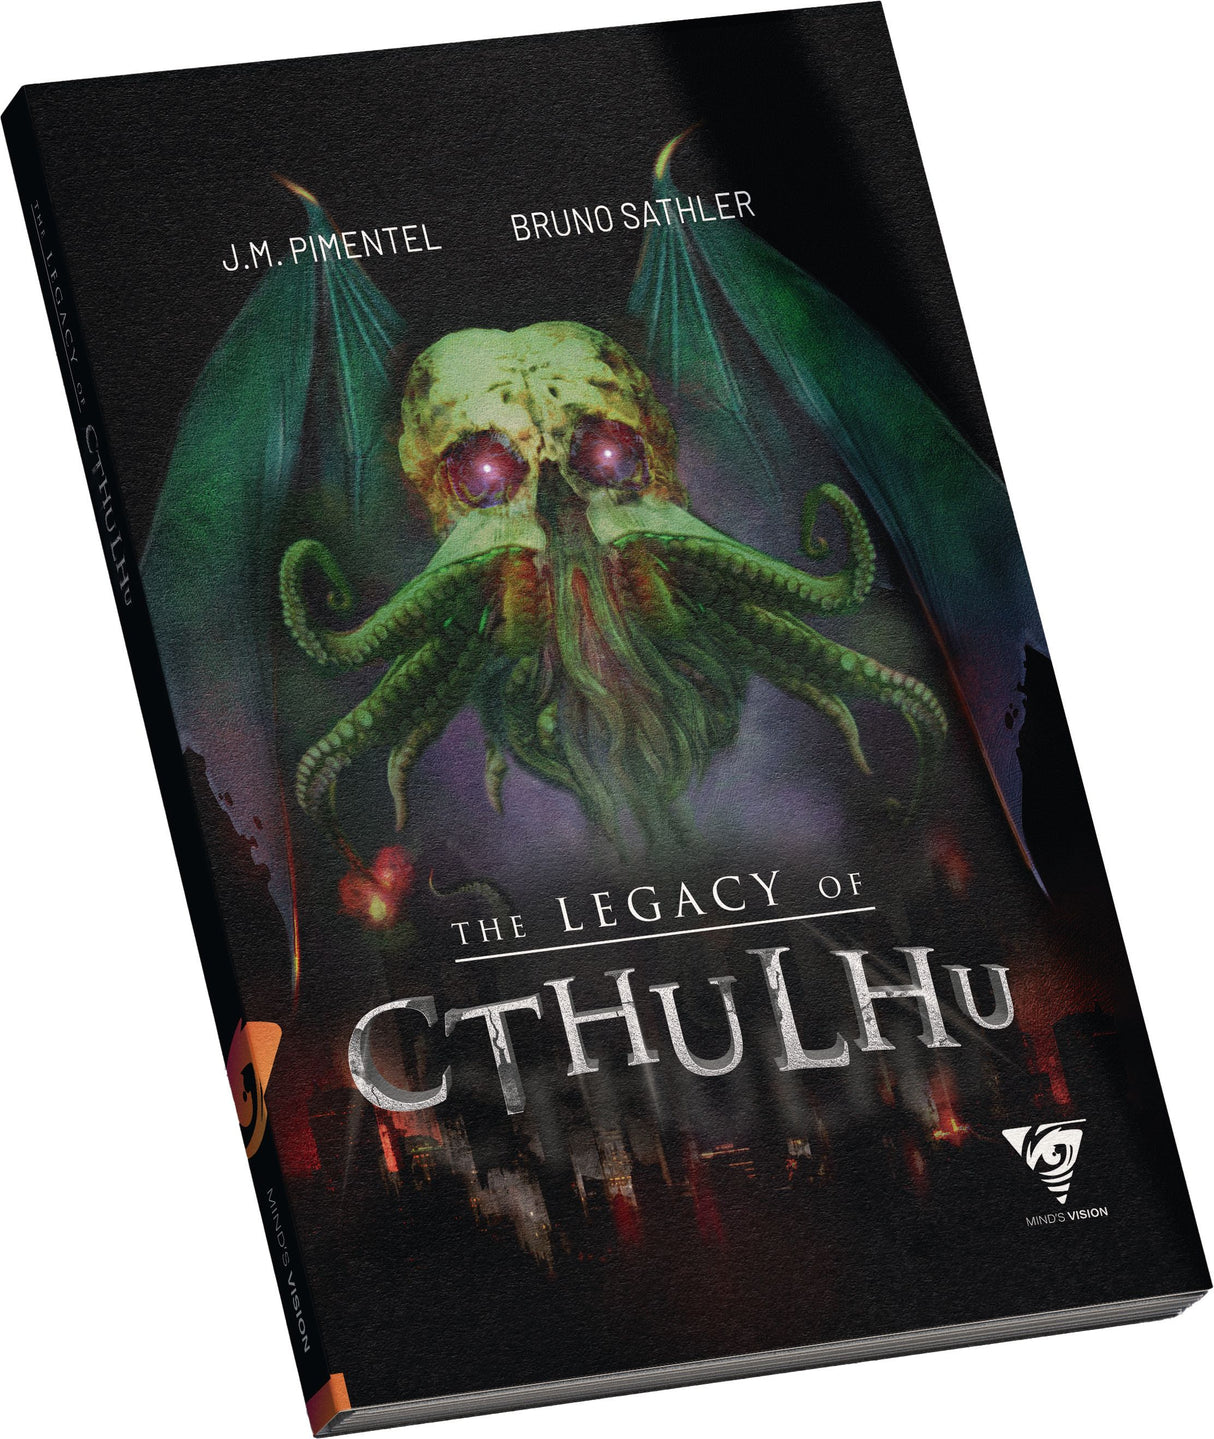 The Legacy of Cthulhu (Deluxe Hardcover)